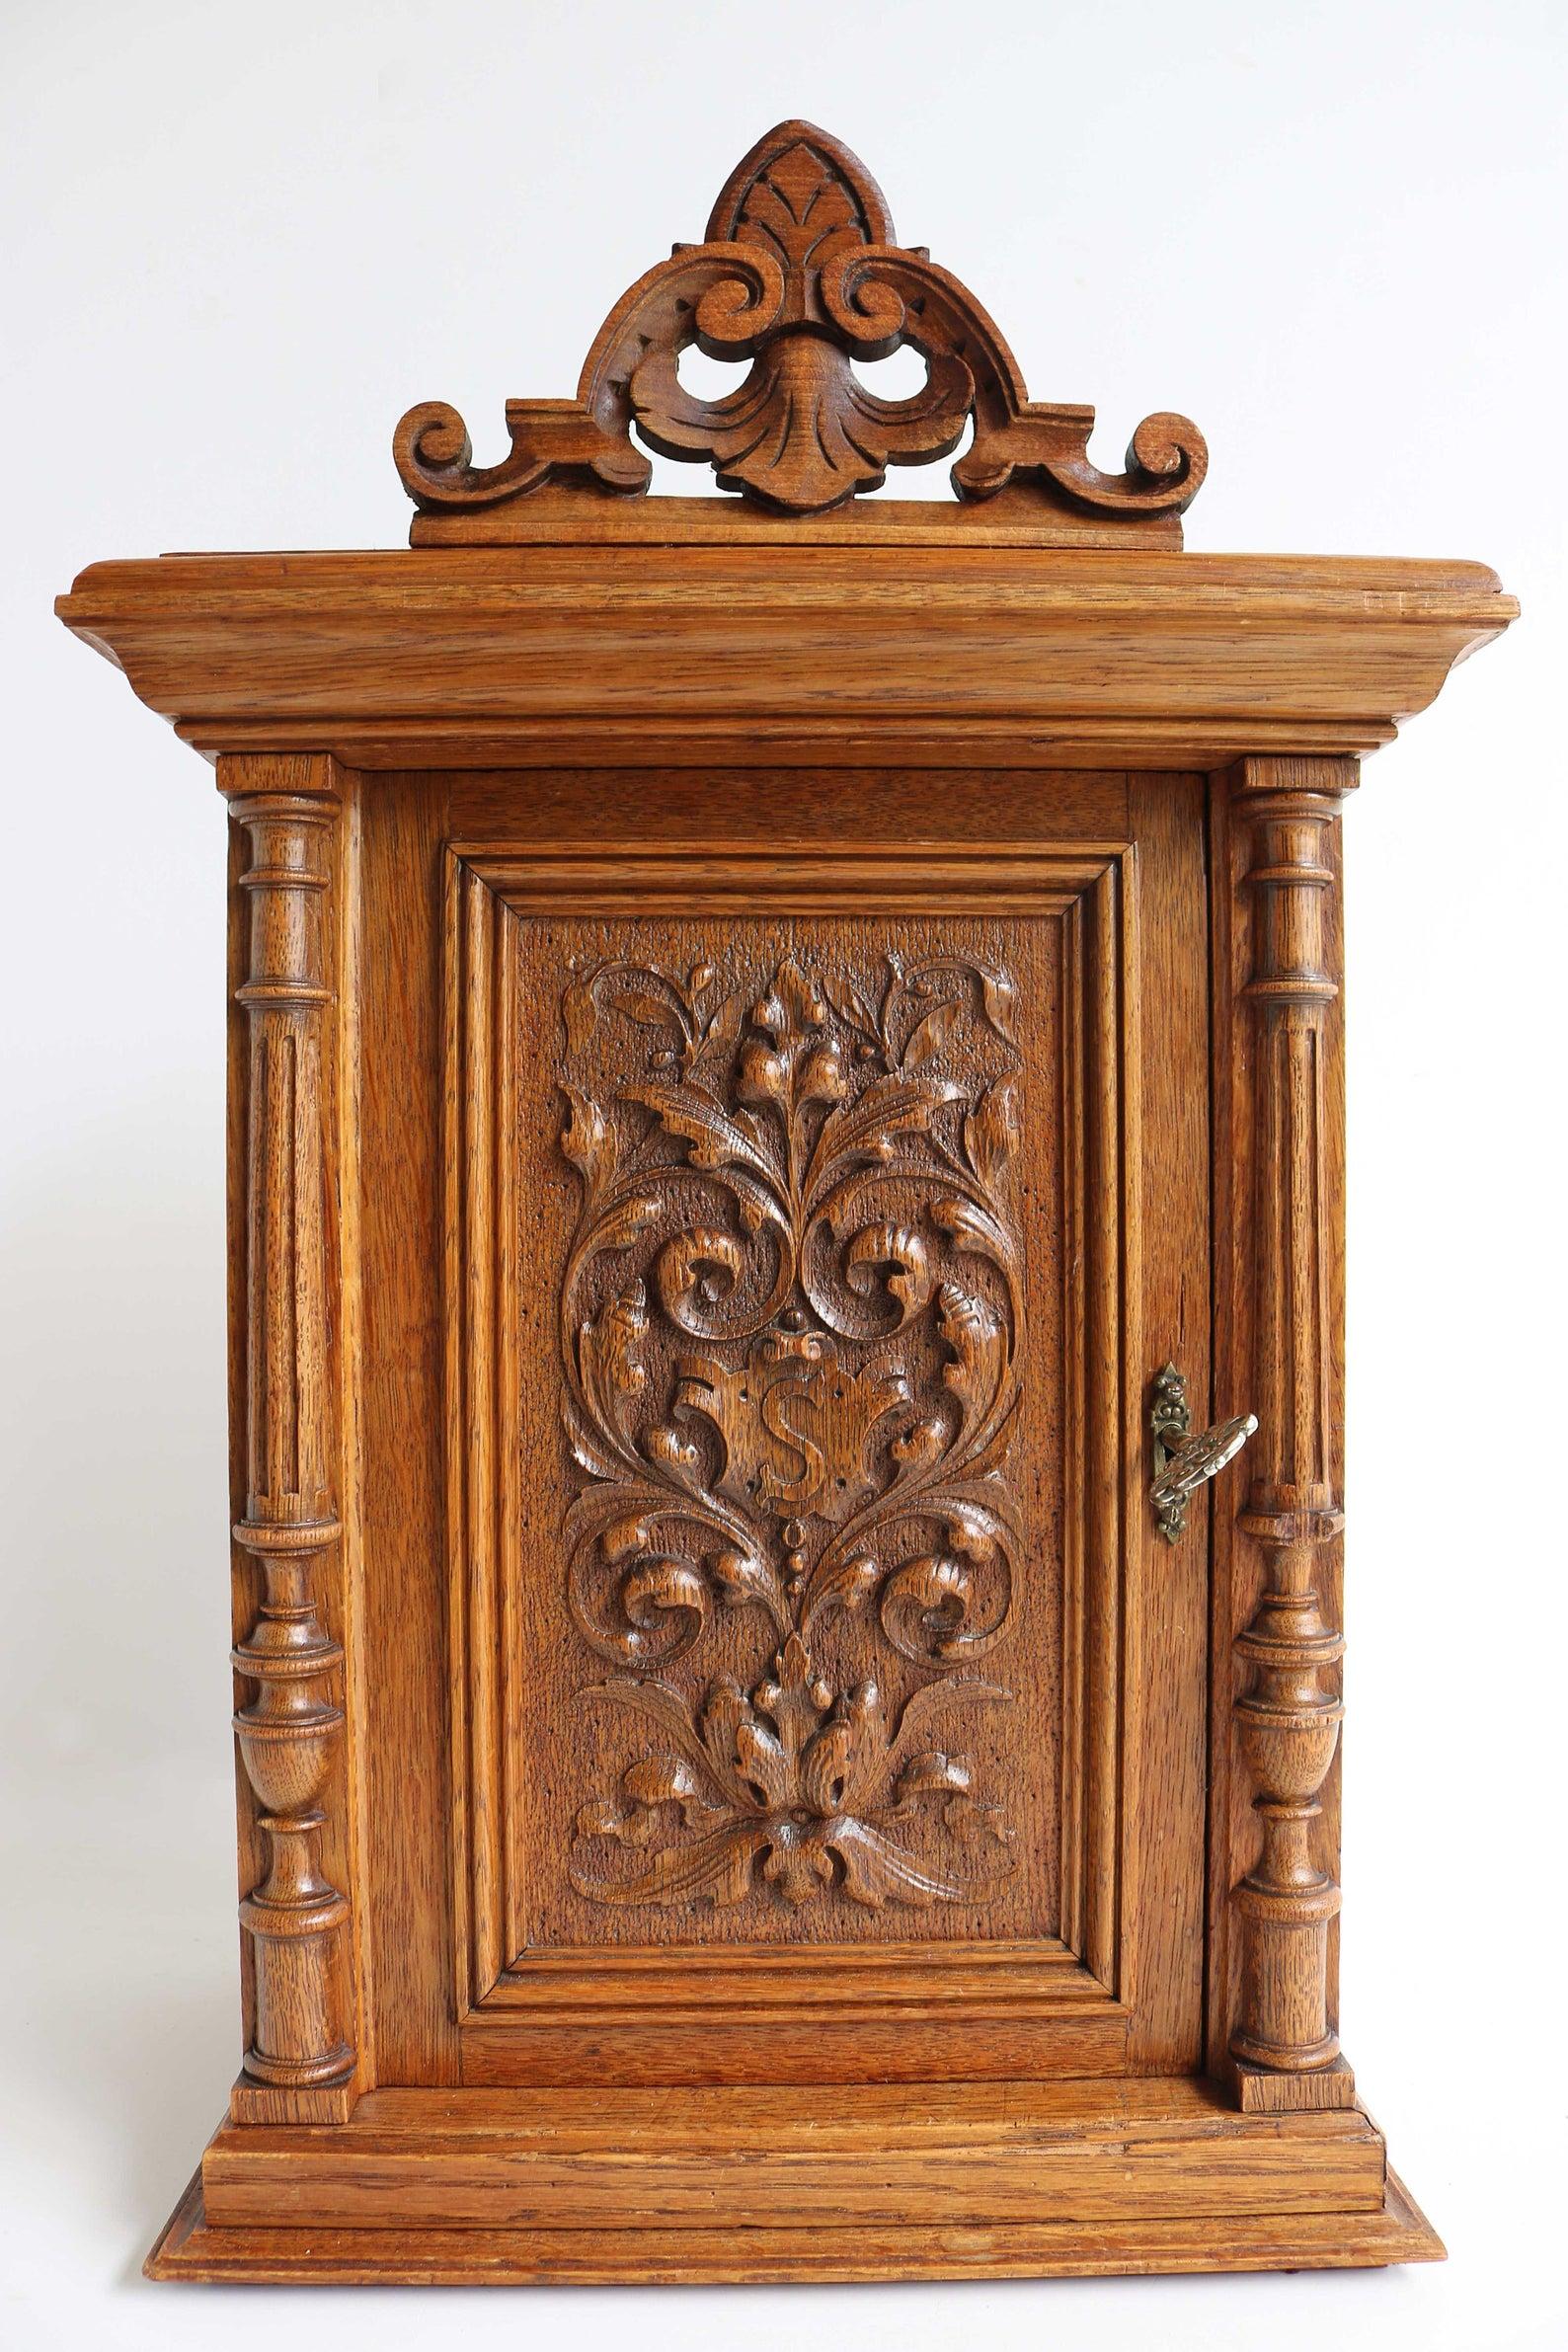 Antique German wood carved medicine bathroom kitchen cabinet small wall cabinet Apothecary Key-cabinet 1900 Authentic Sanitätskasten

Gorgeous German antique oak wood carved standing or hanging cupboard.
Truly a beautiful authentic medicine